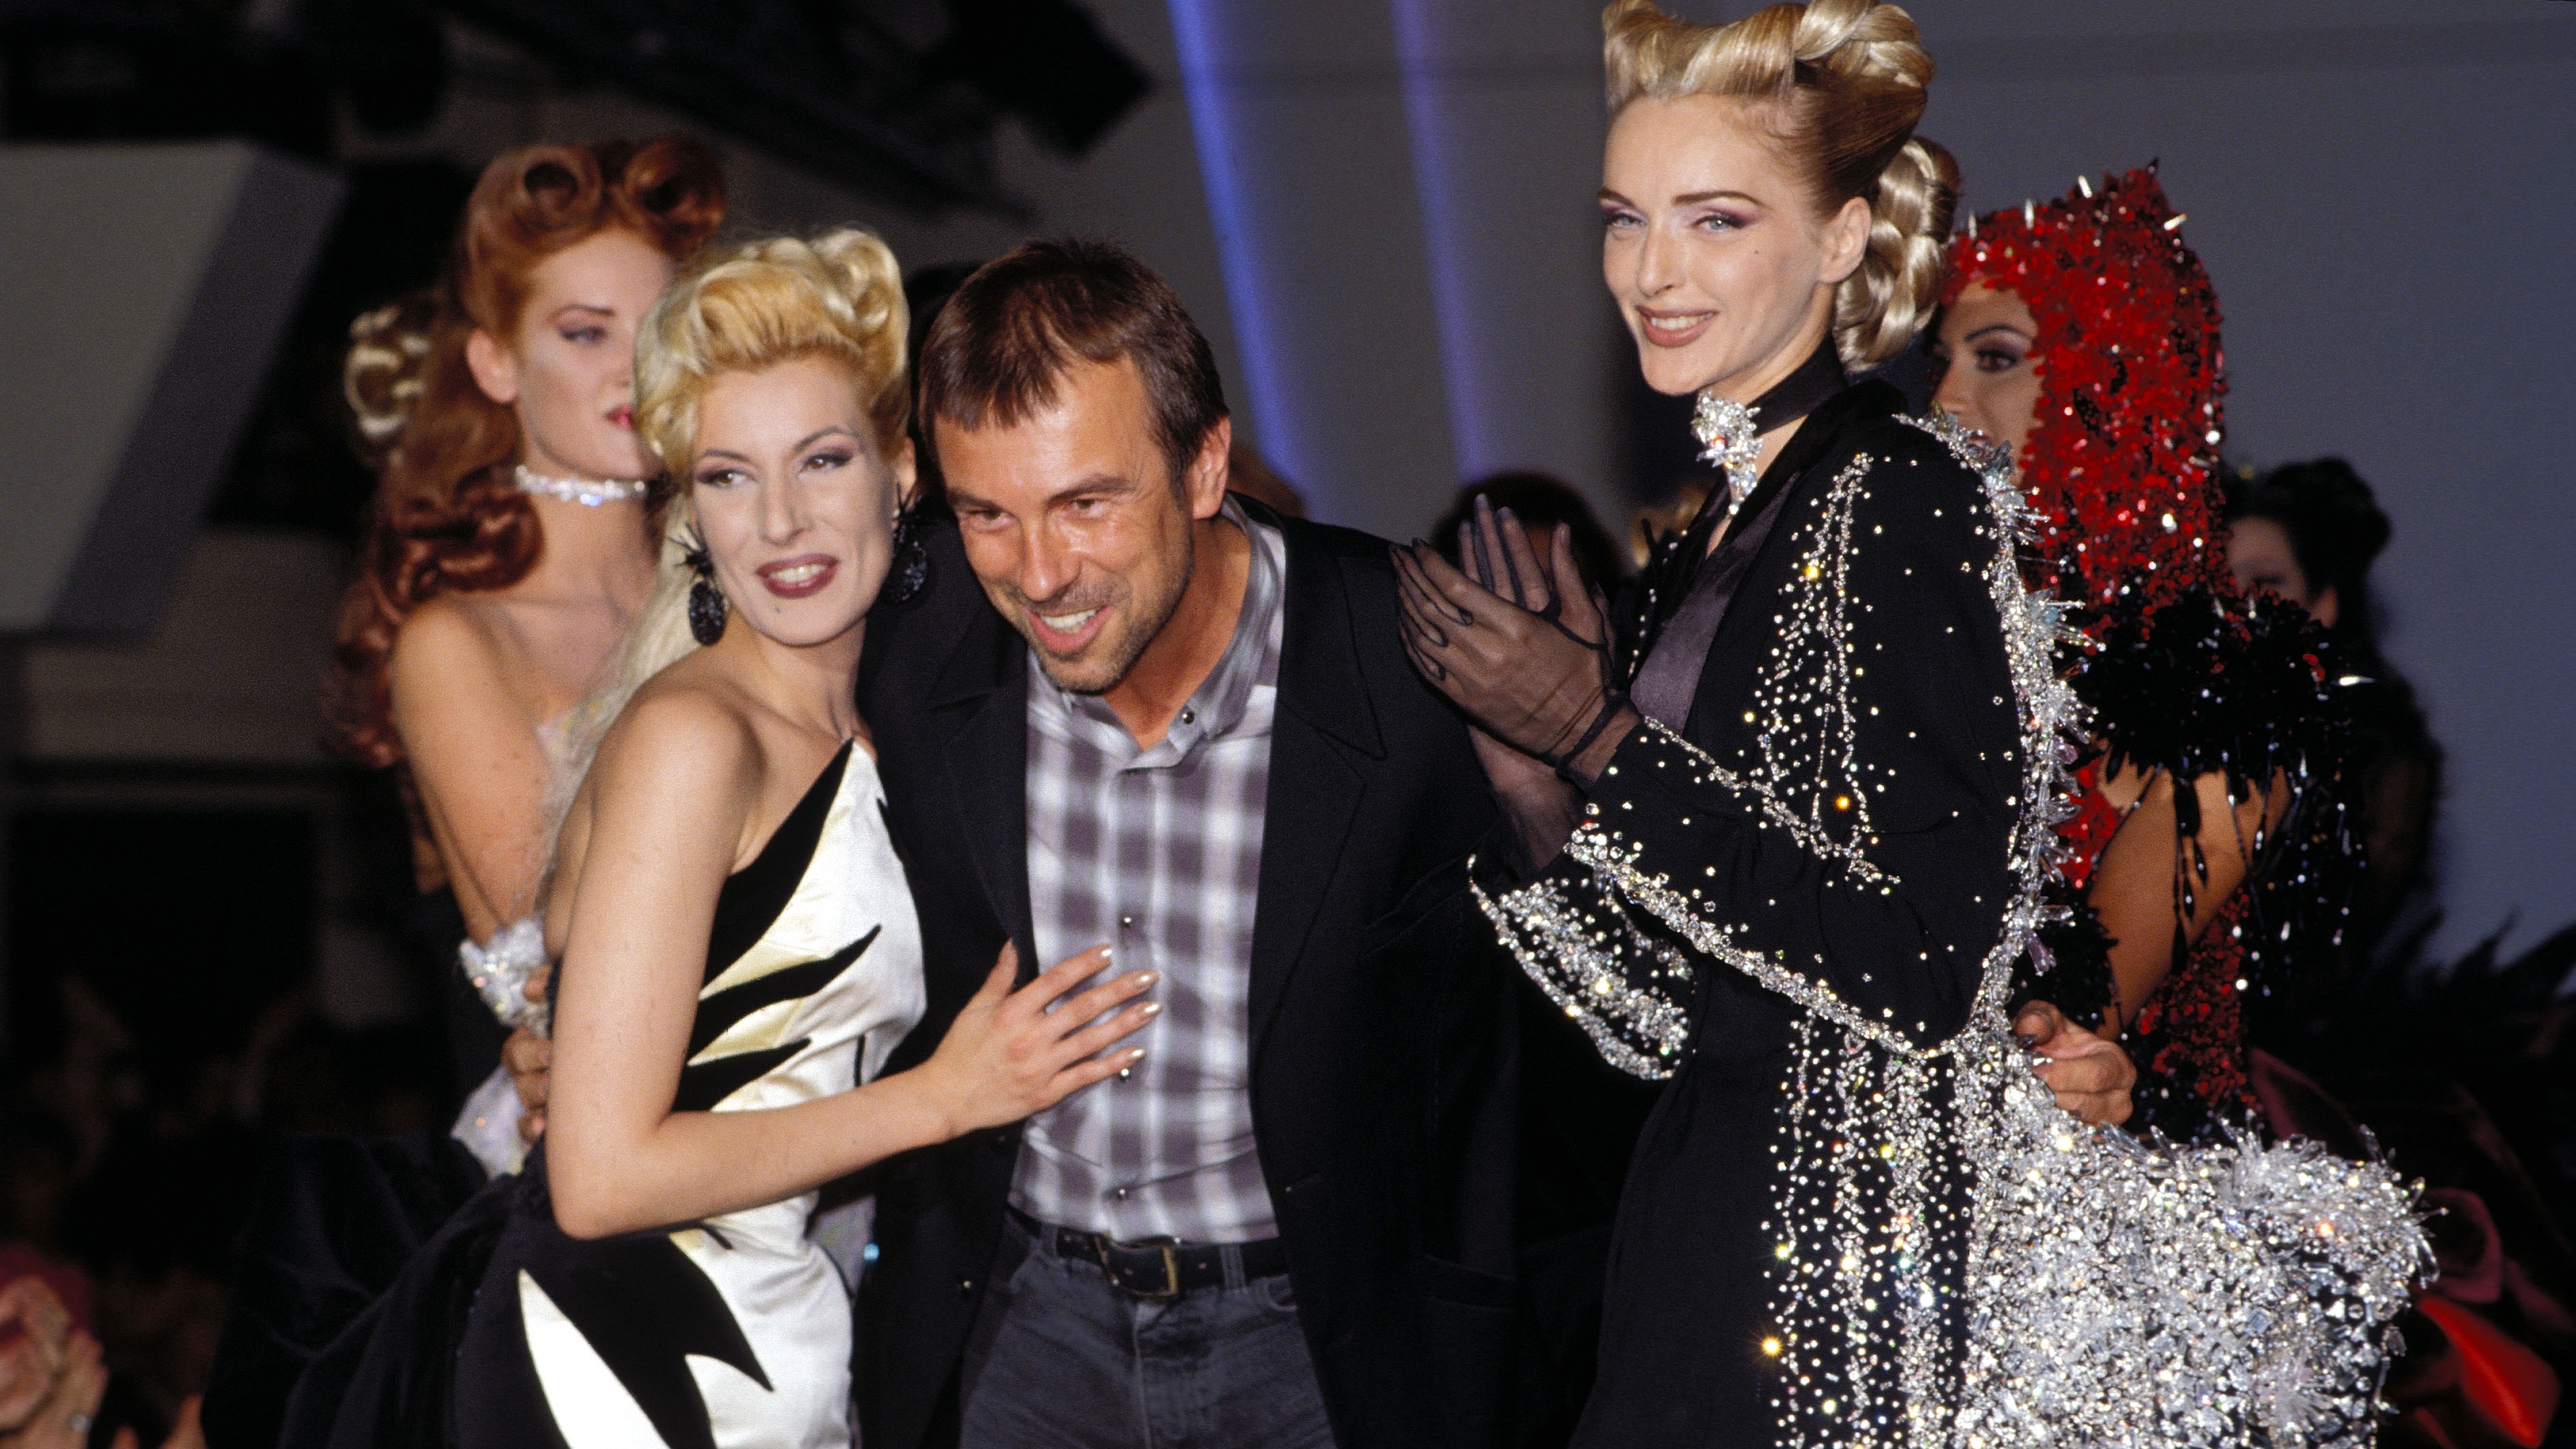 French Fashion Designer Manfred Thierry Mugler Has Died Aged 73